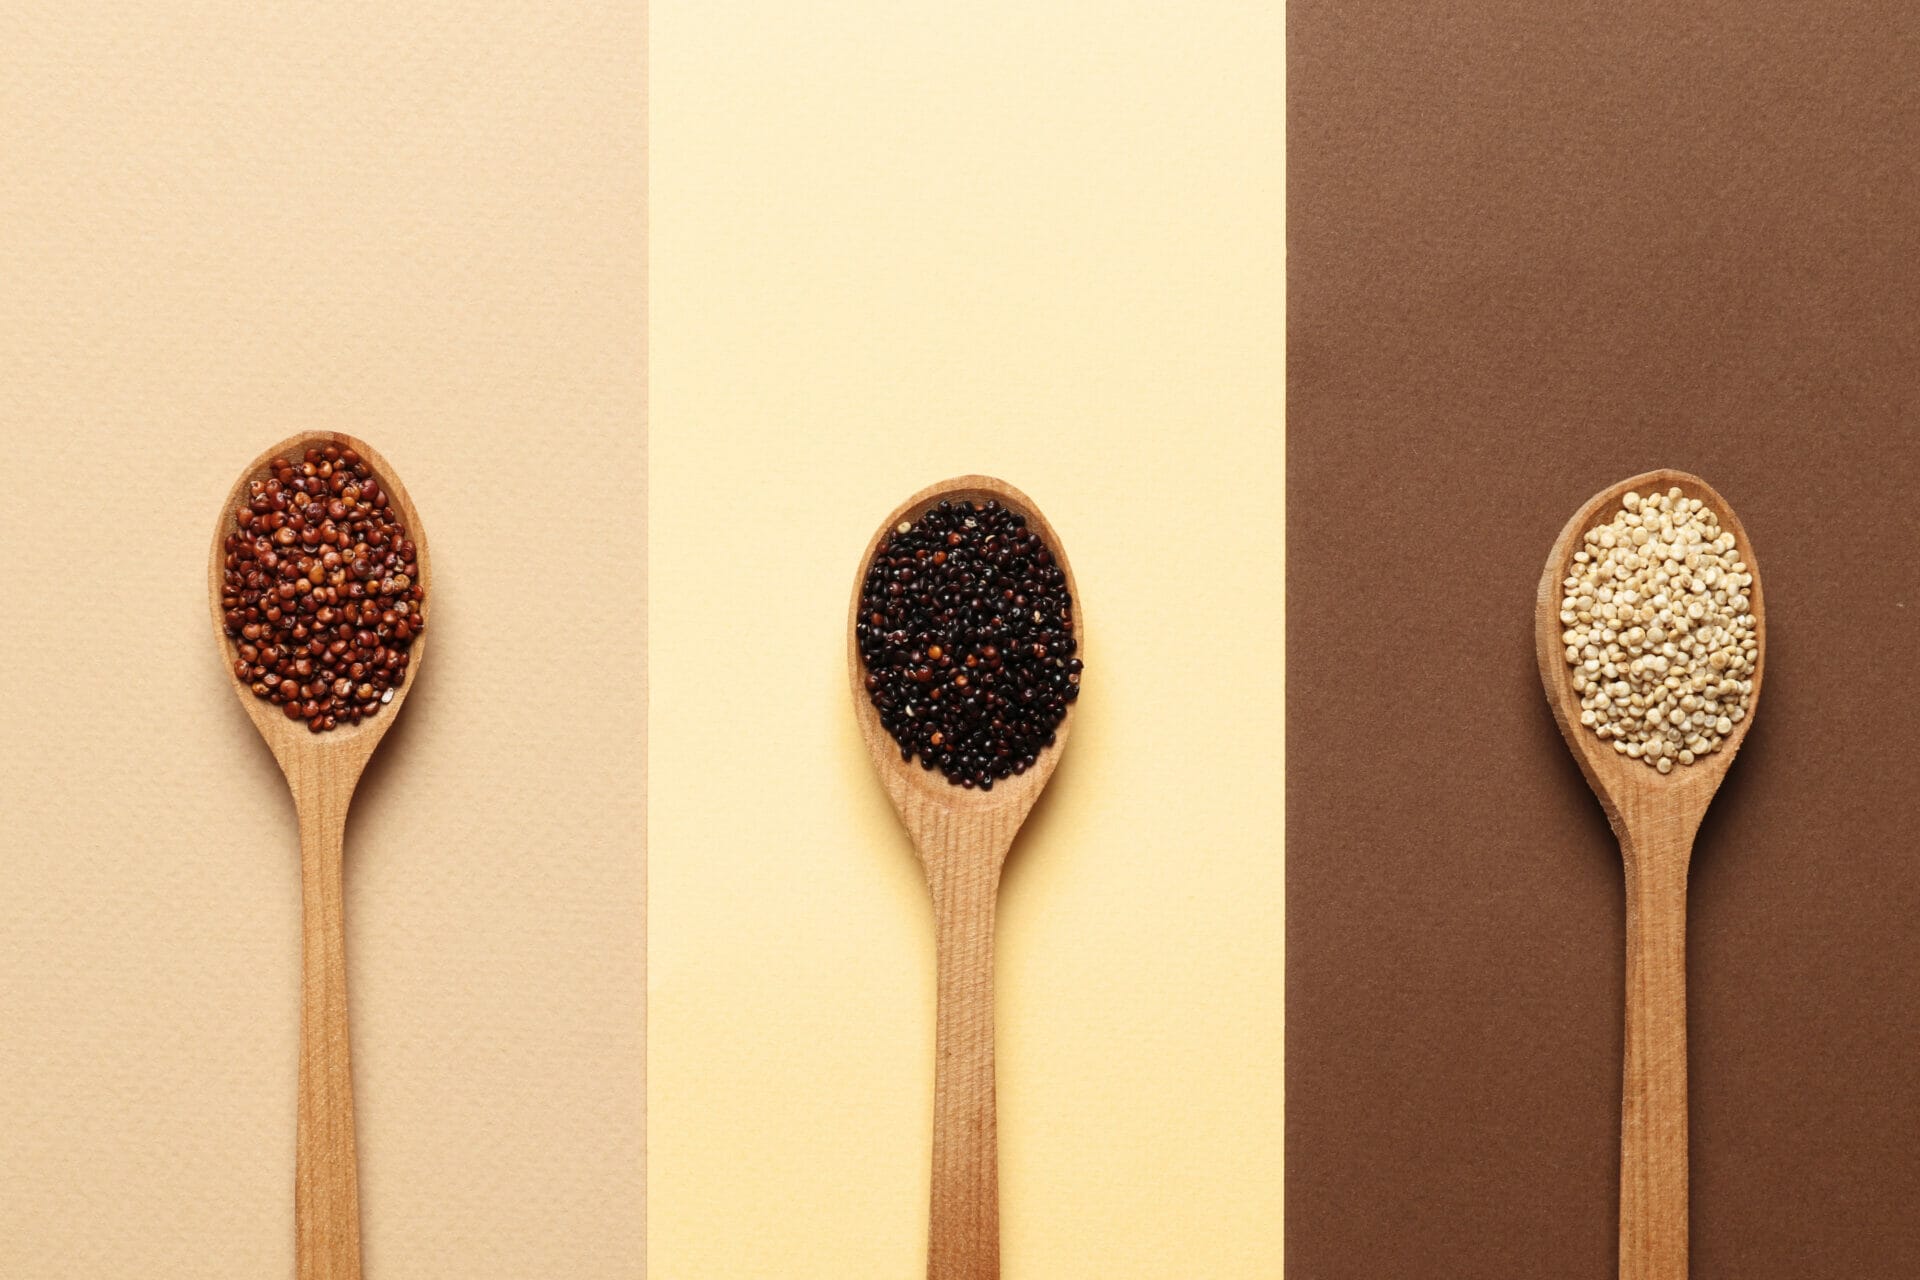 composition quinoa all kinds wooden spoons background top view